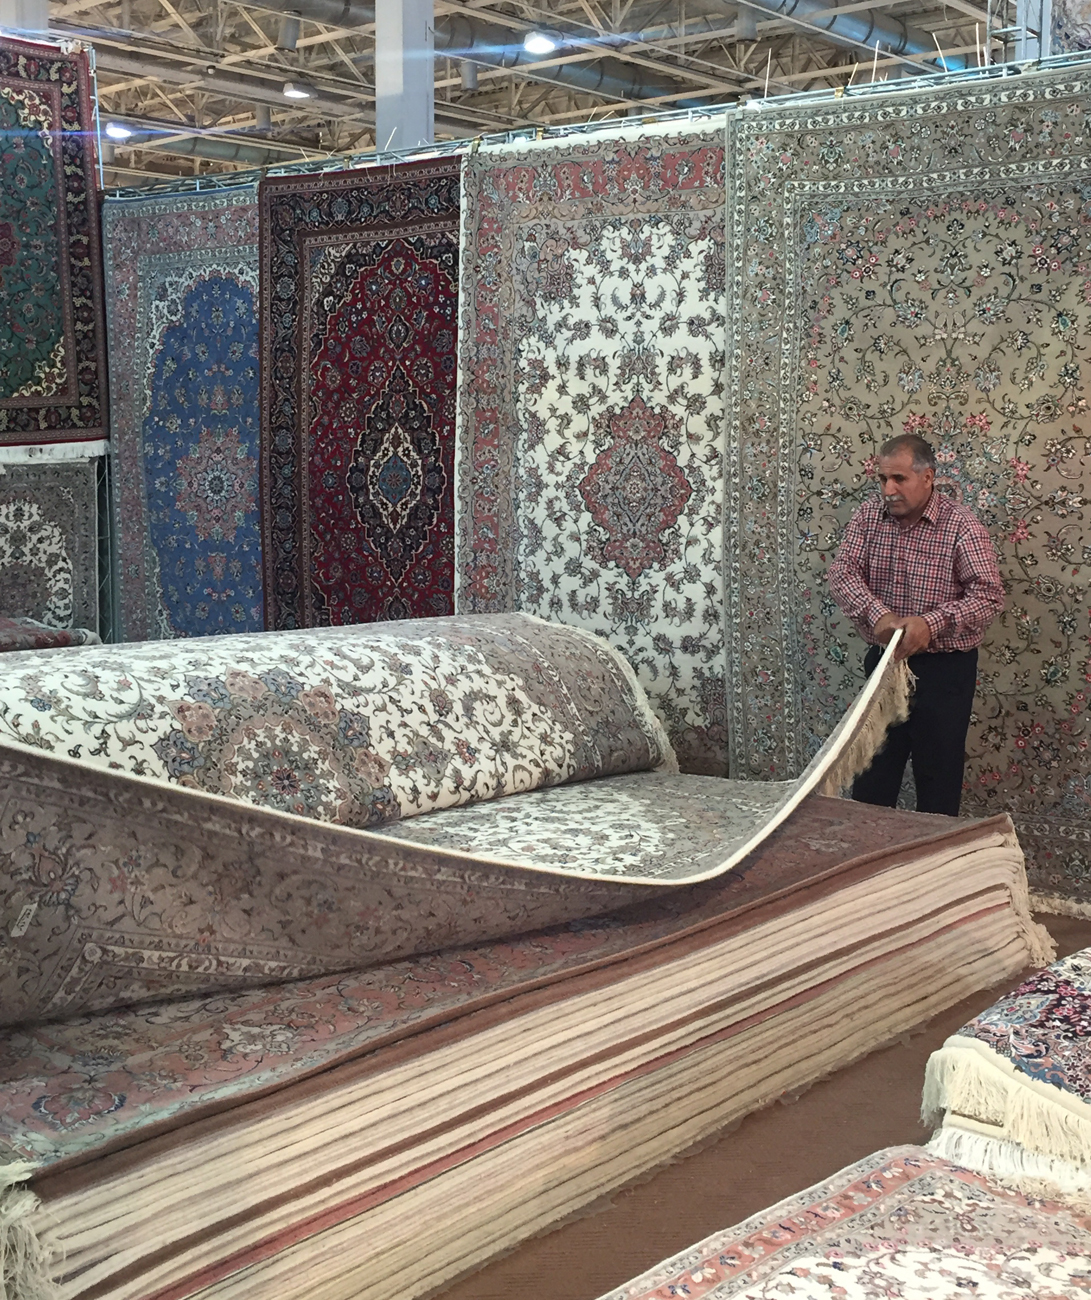 Weaving carpets is an old art and craft which dates back to the dawn of human civilization